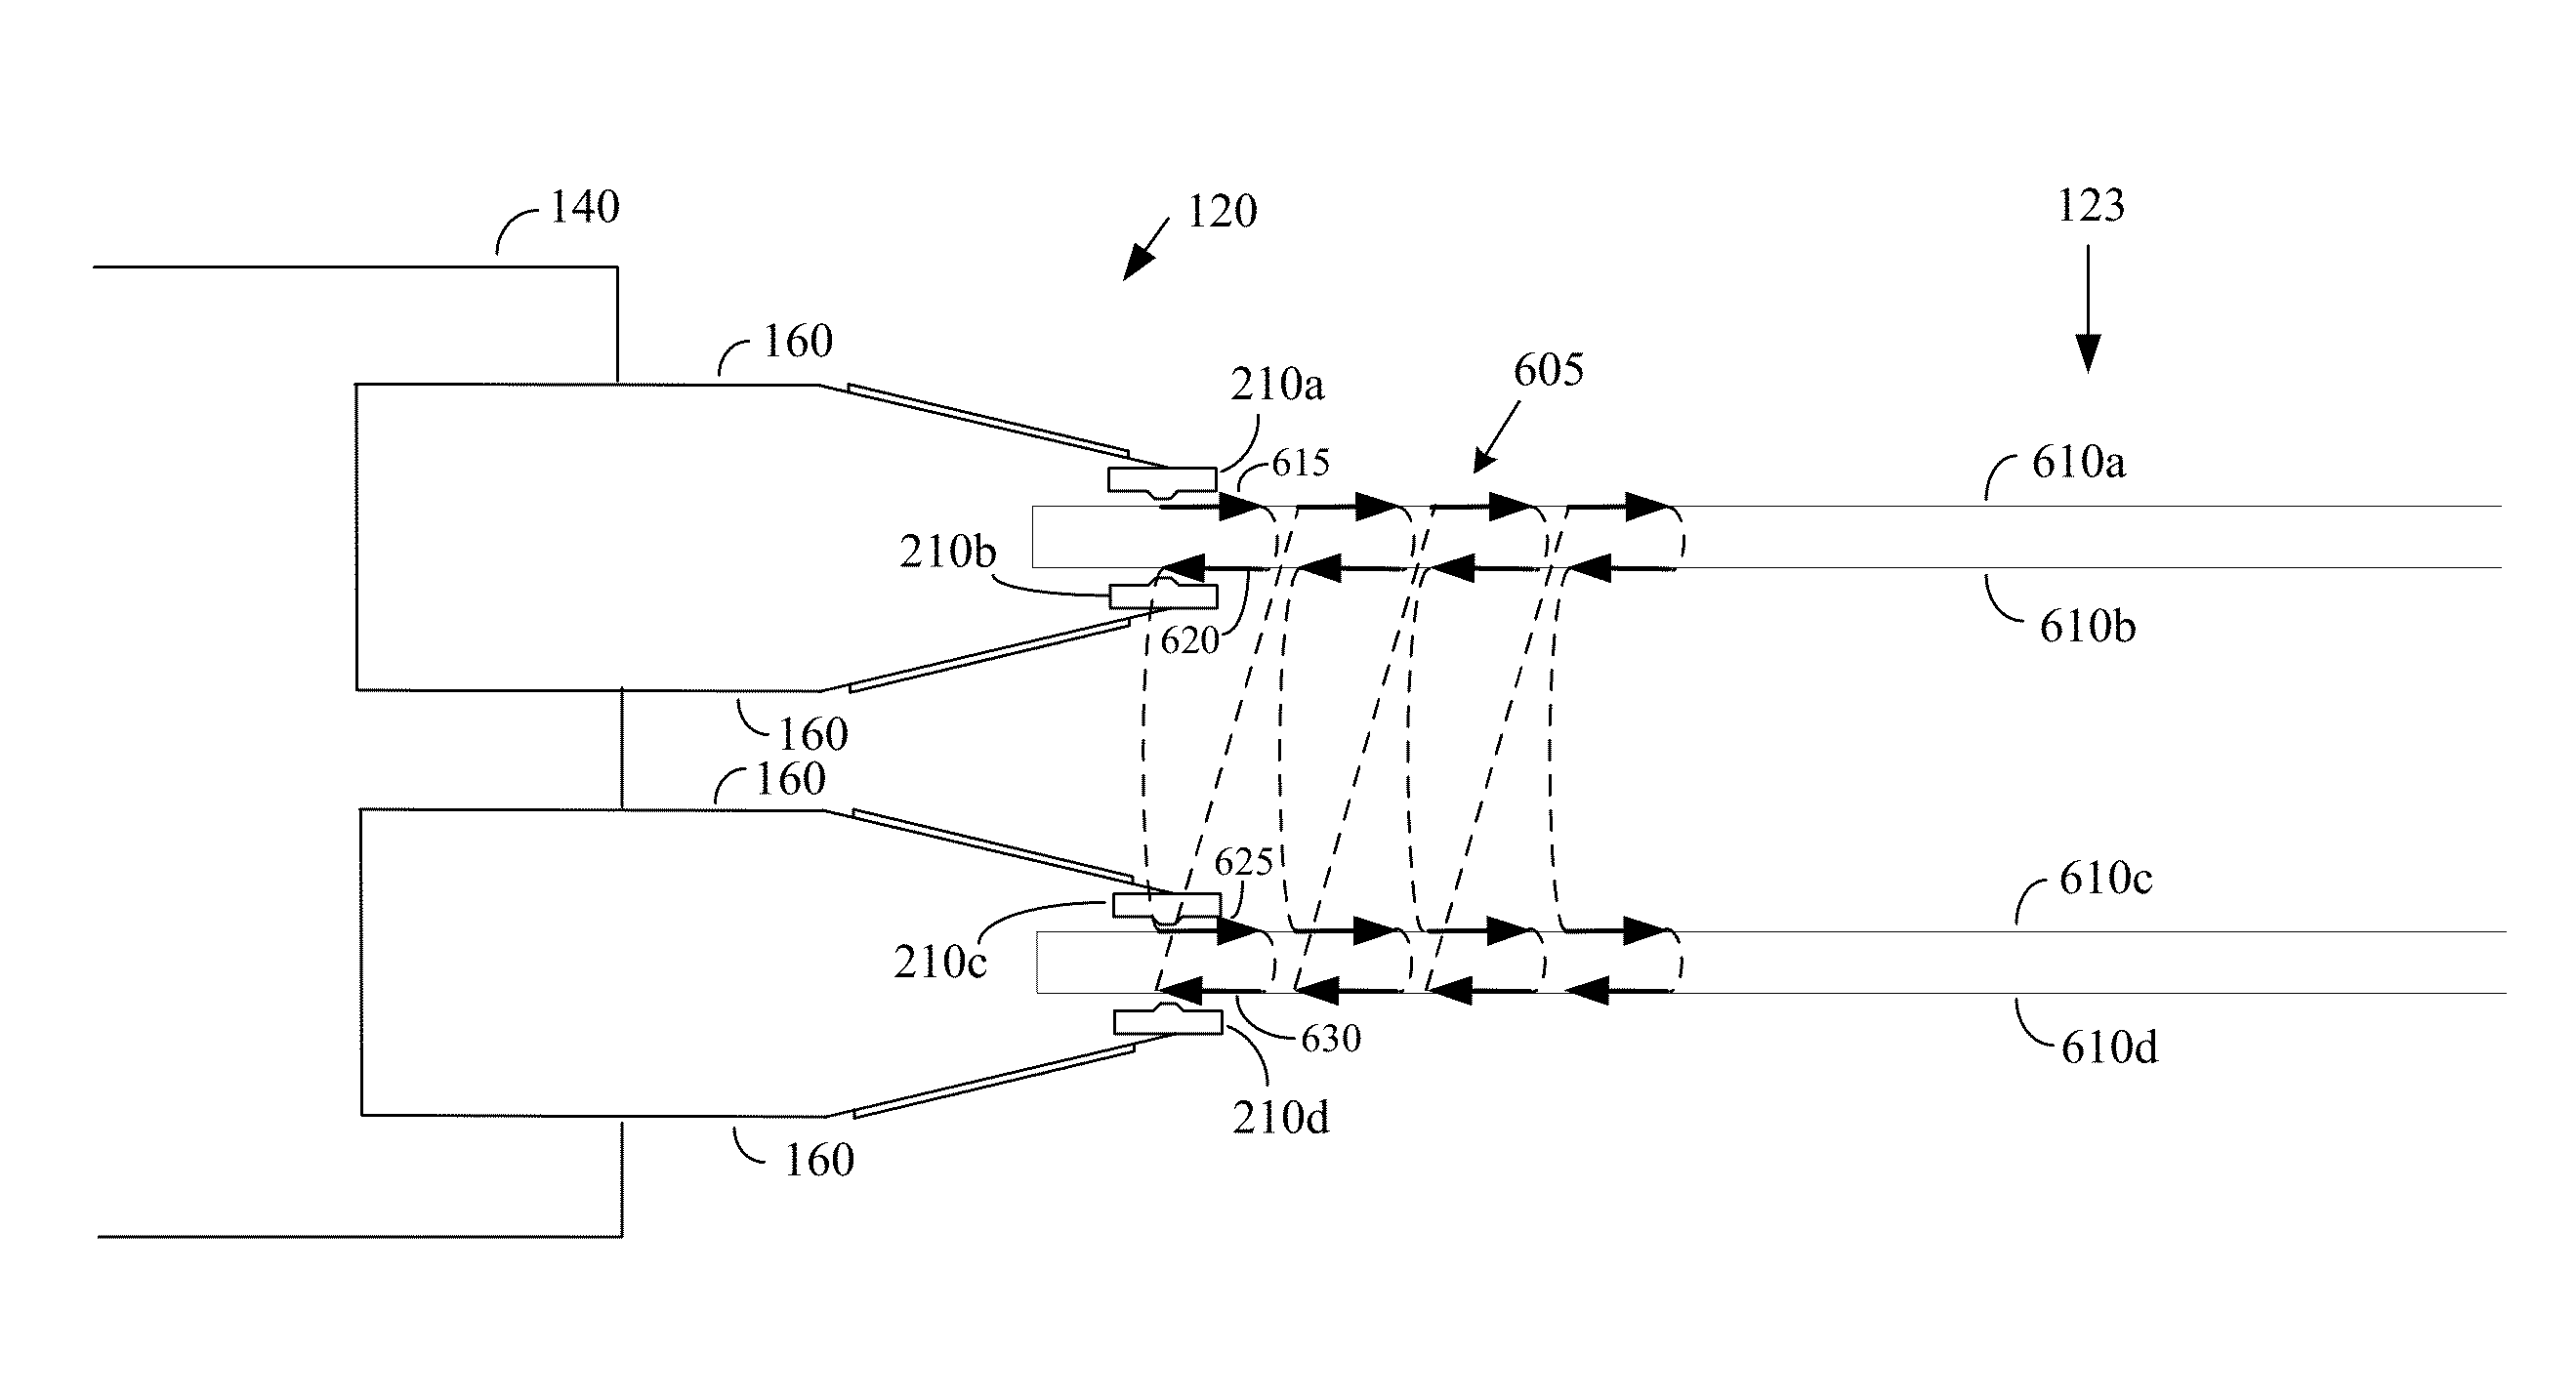 Systems and methods for improving sequential data rate performance using sorted data zones